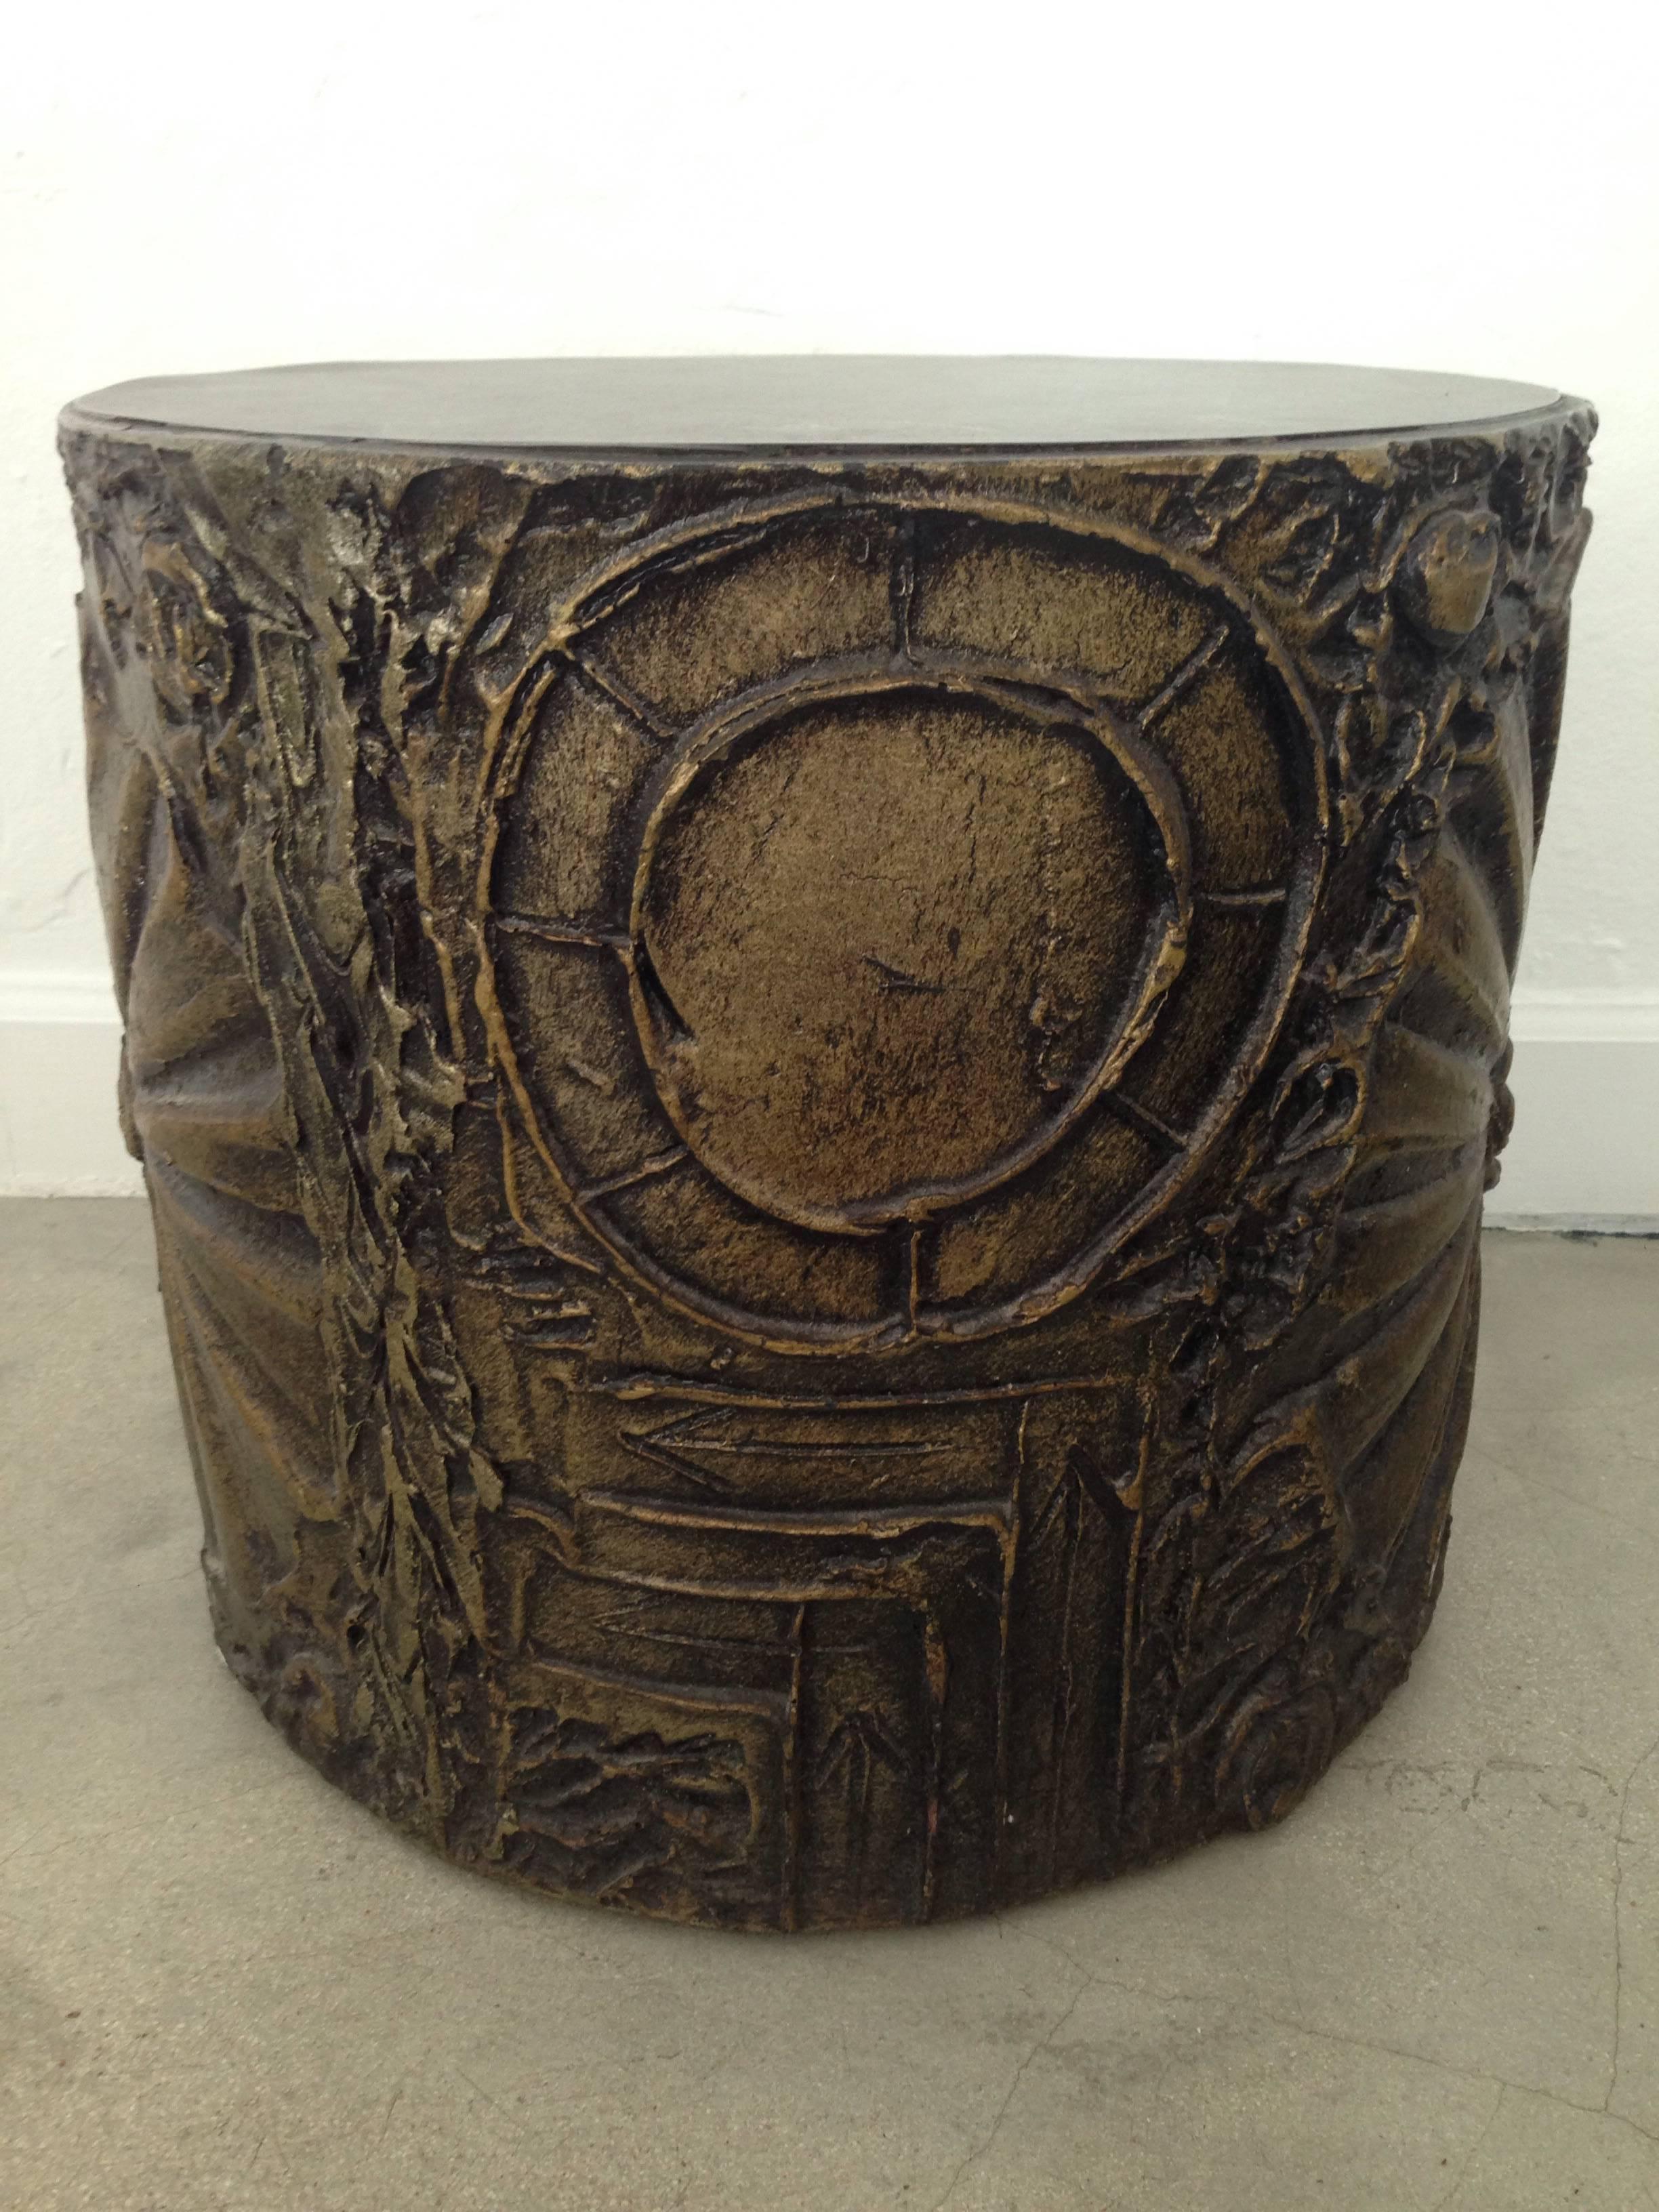 Brutalist side or end tables in bronze and black cast resin by Adrian Pearsall for Craft Associates.